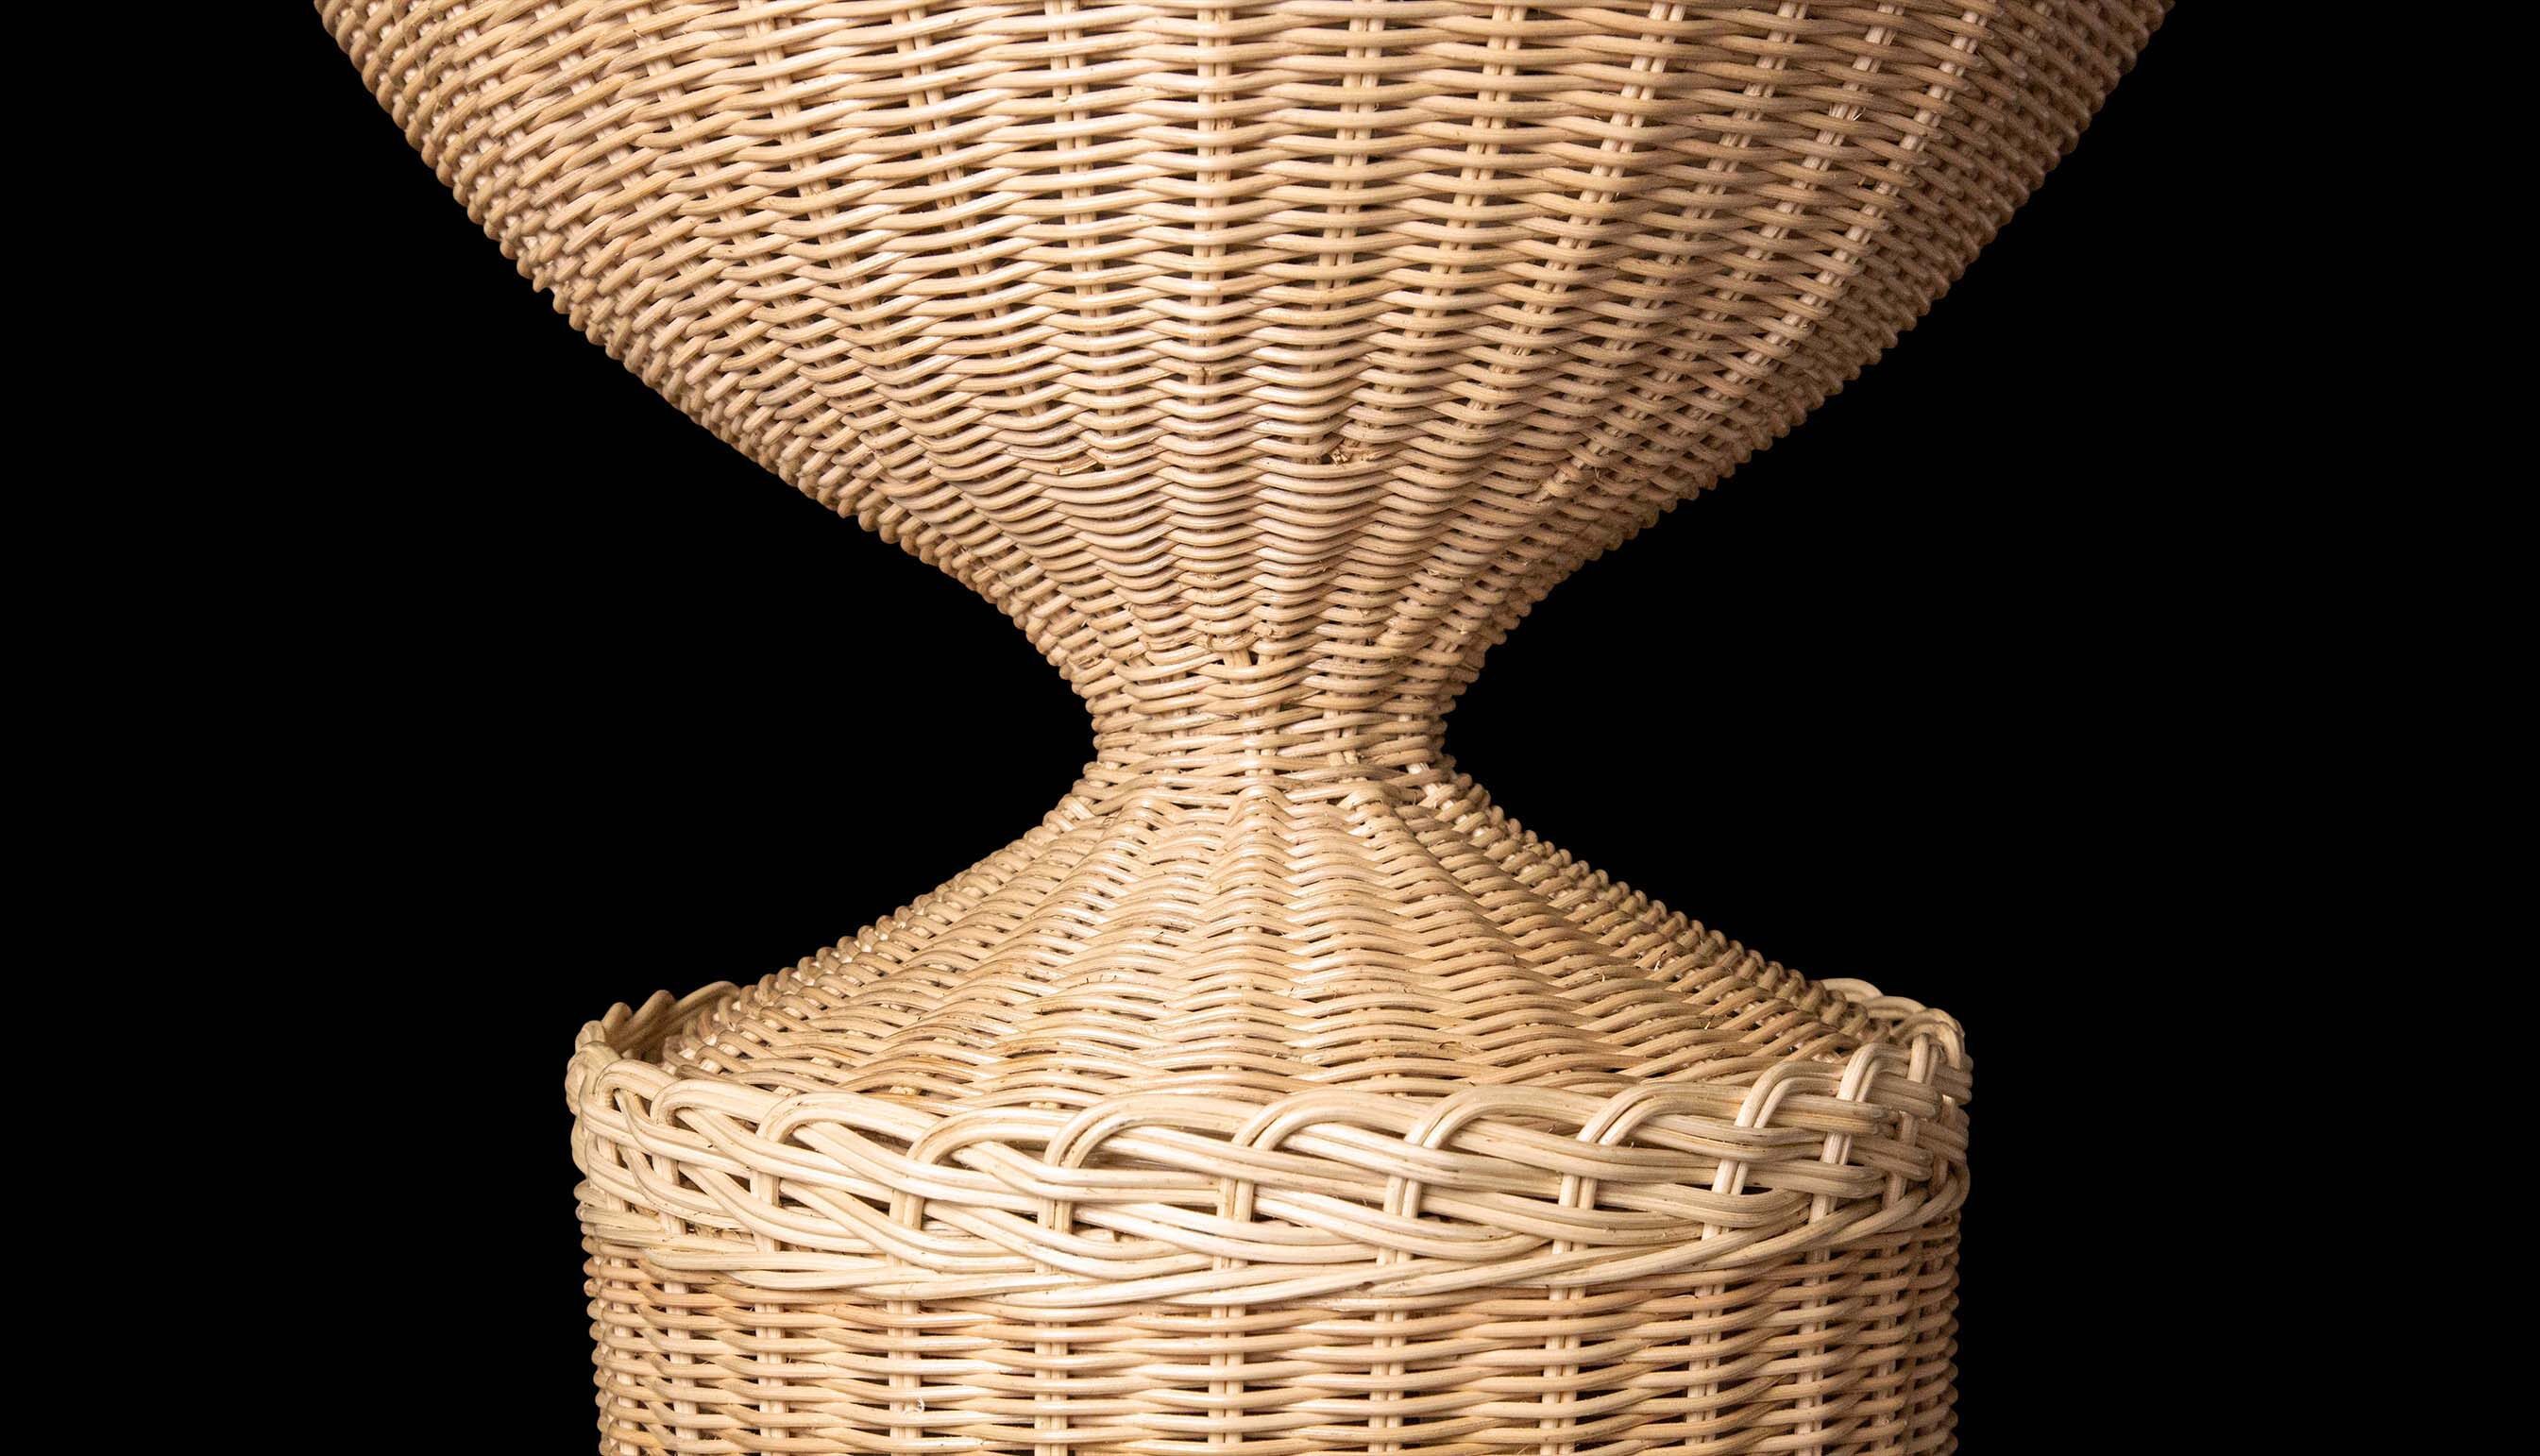 Creel and Gow Tall Wicker Pedestal with Urn